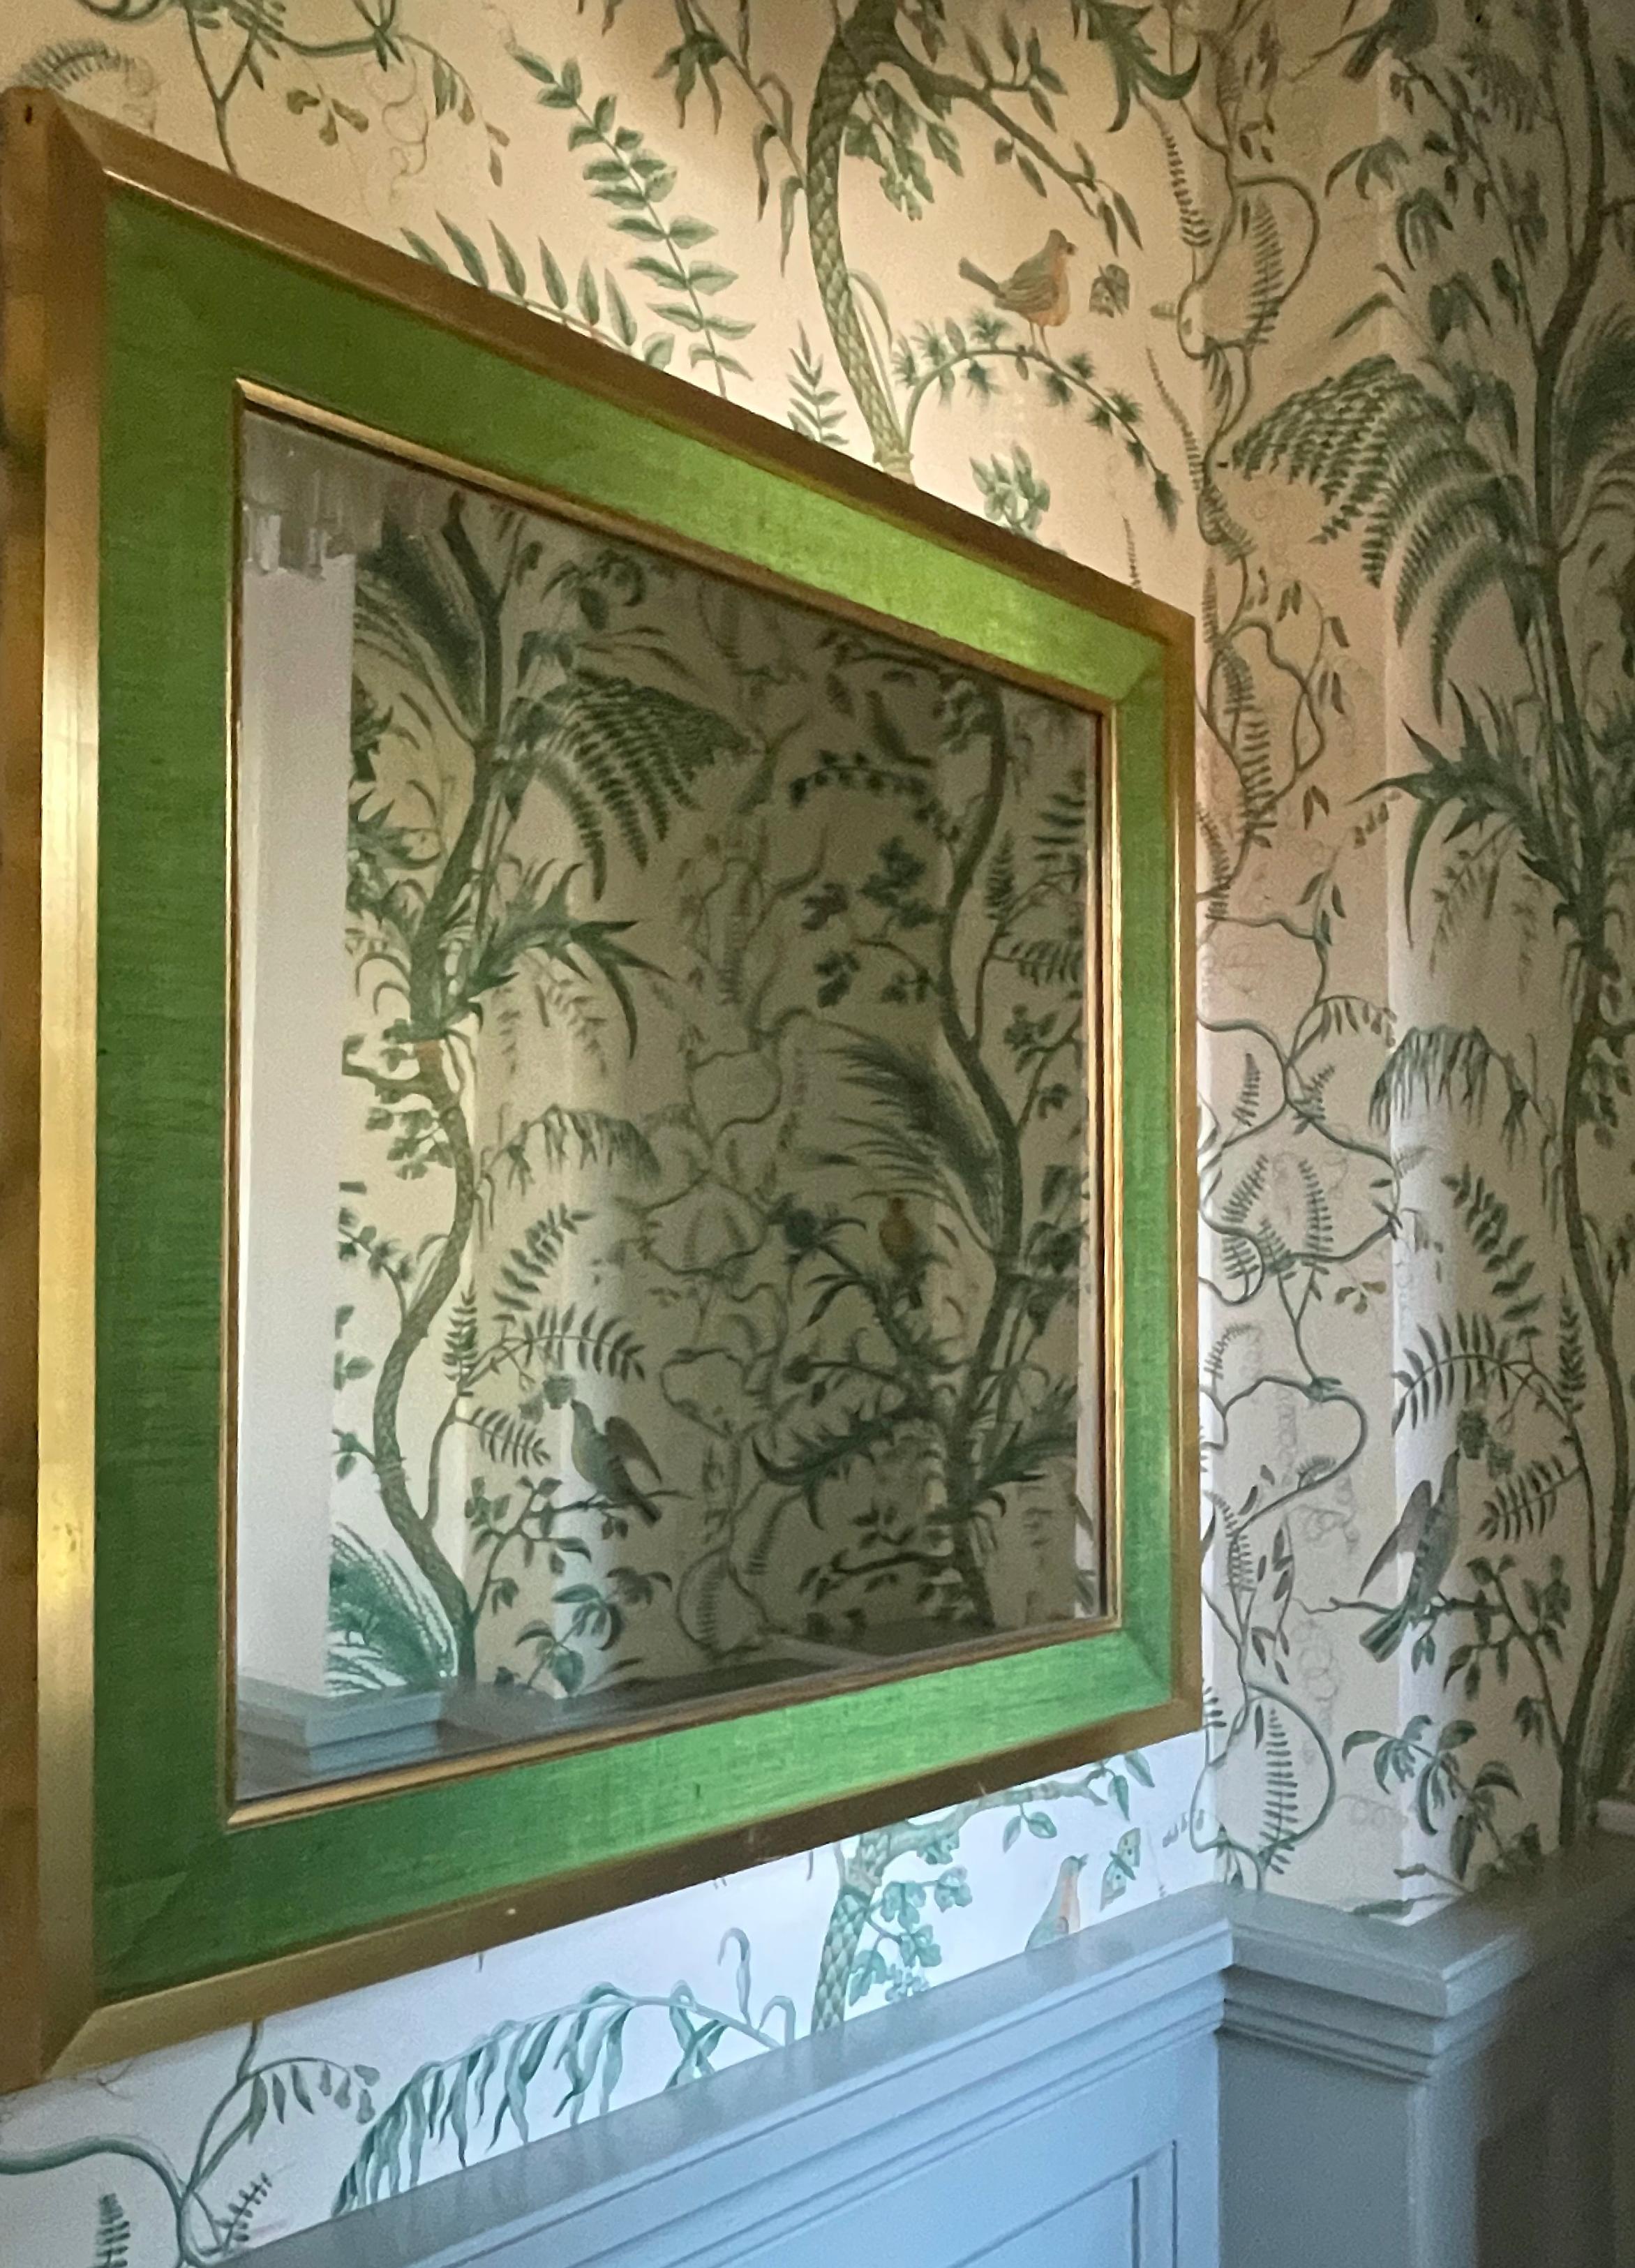 Estrid ericson attributed & mid-century modern design.

A beautiful green fabric and gilt wood wall mirror, attributed to Estrid Ericson, Sweden, 1950s. 

The mirror has patina but is a very good original vintage condition. A stunning